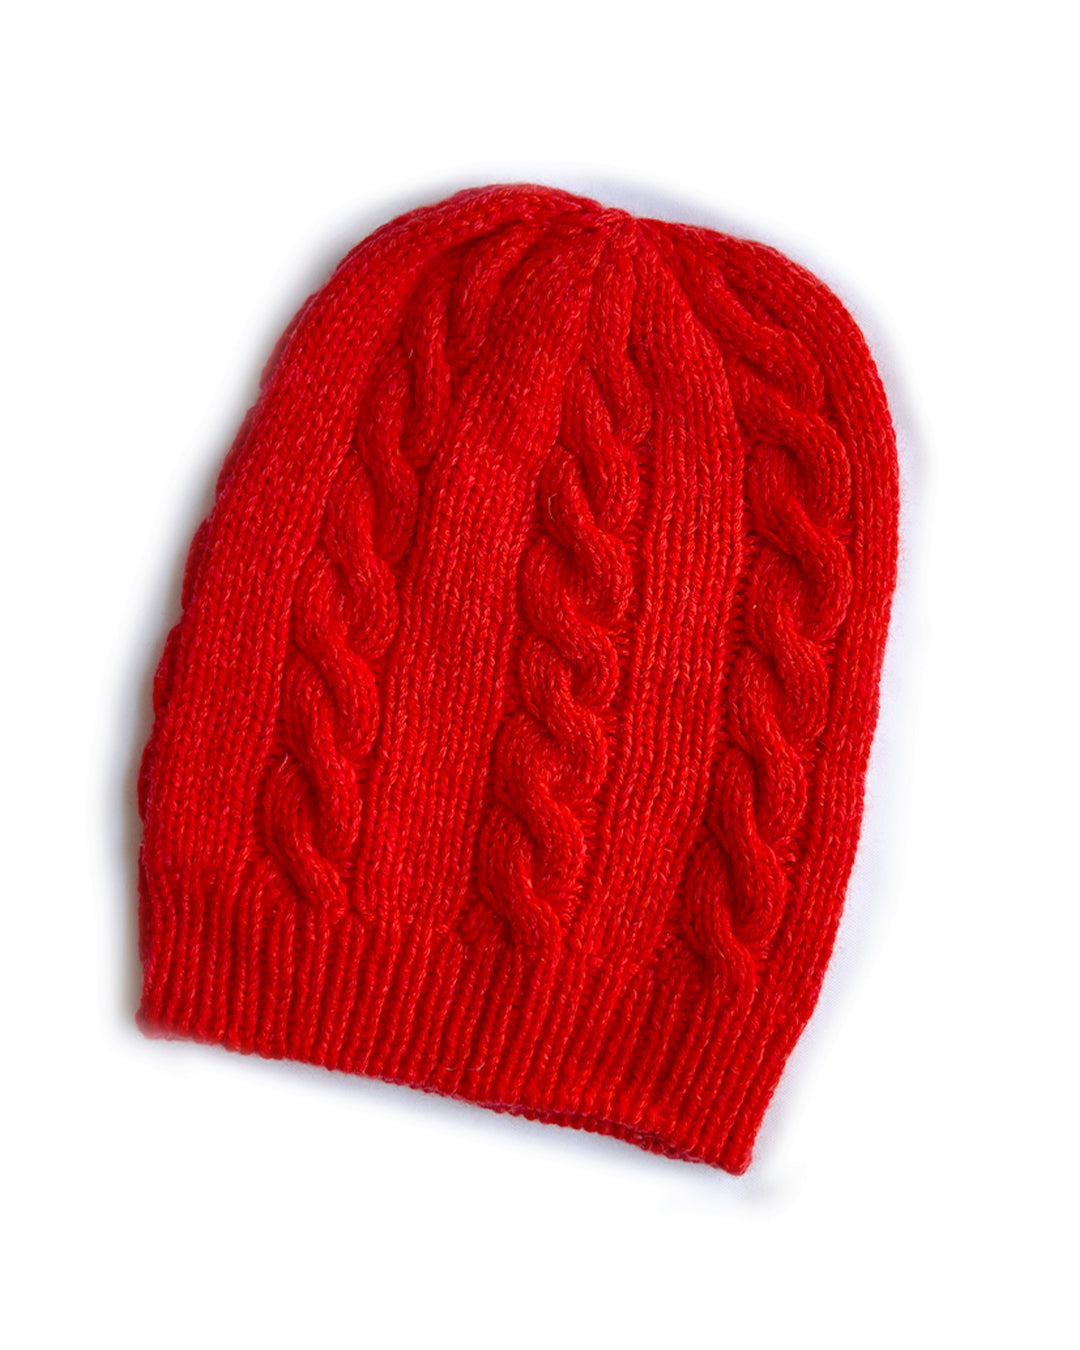 Red Orange Cable Knit Cashmere Beanie | cukimber designs